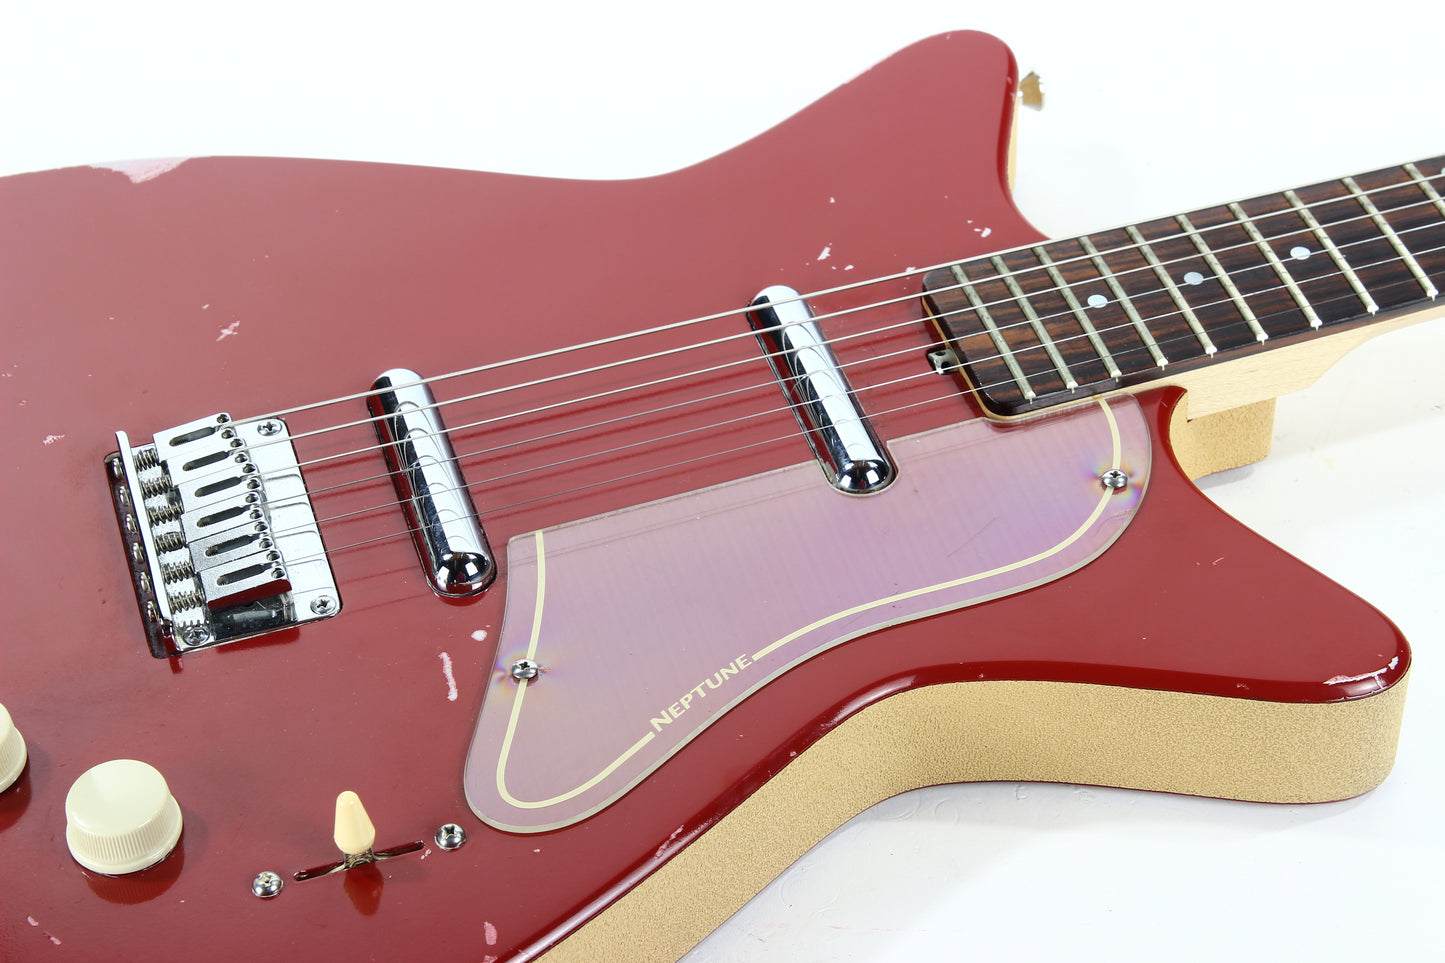 Jerry Jones Neptune Shorthorn 2 Pickup Guitar - Cool Relic! Red, Lipstick Pickups! Jimmy Page Sounds!